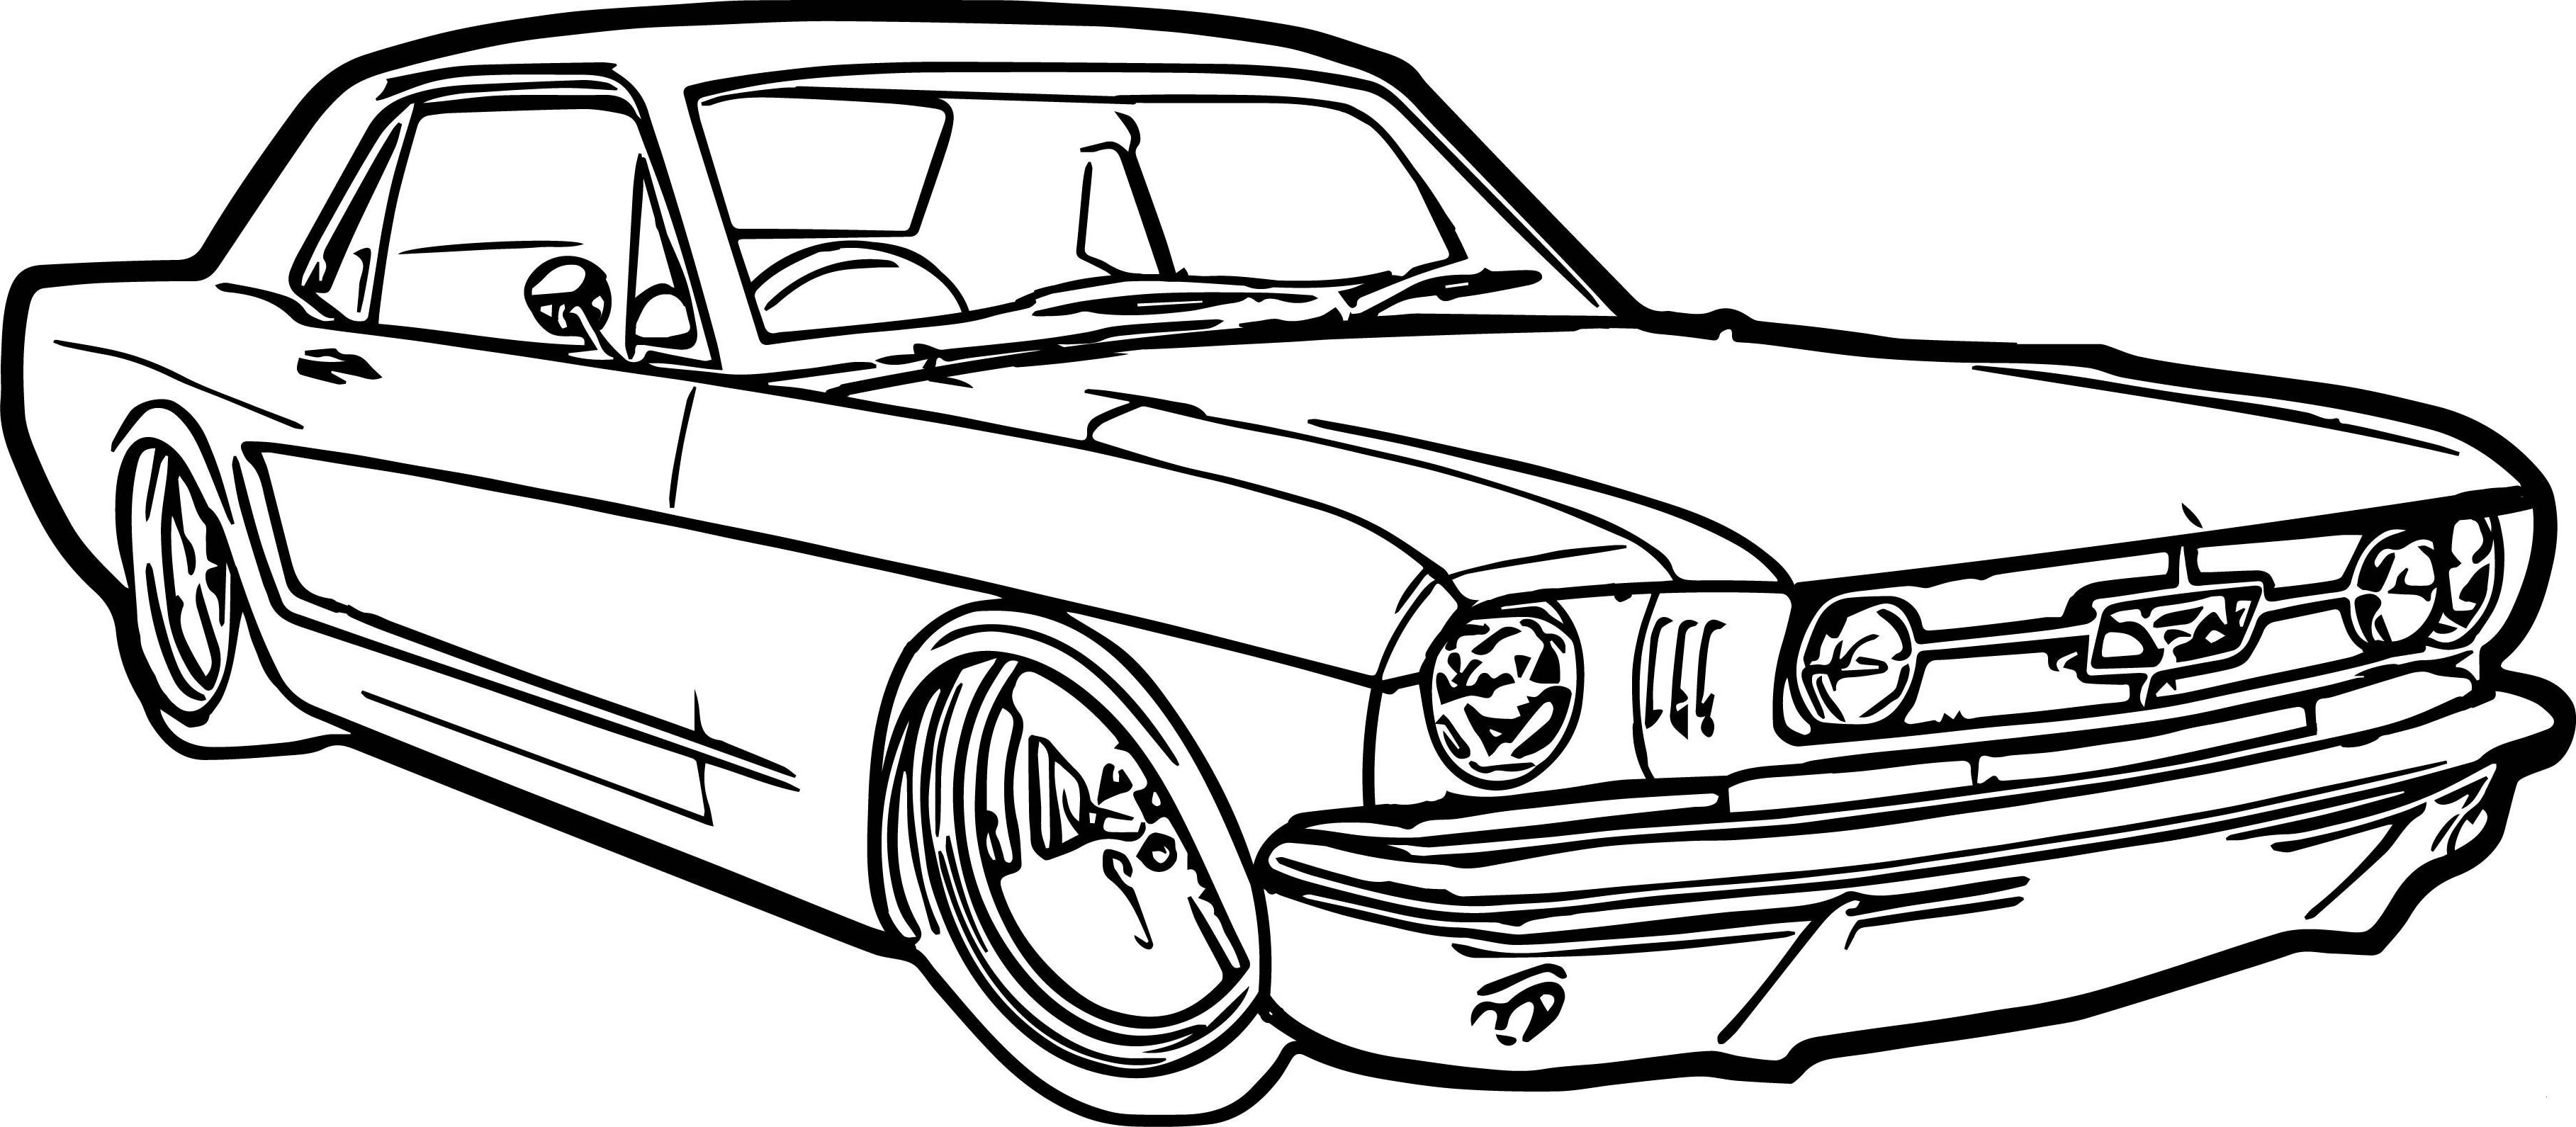 Car Drawing Easy | Free download on ClipArtMag